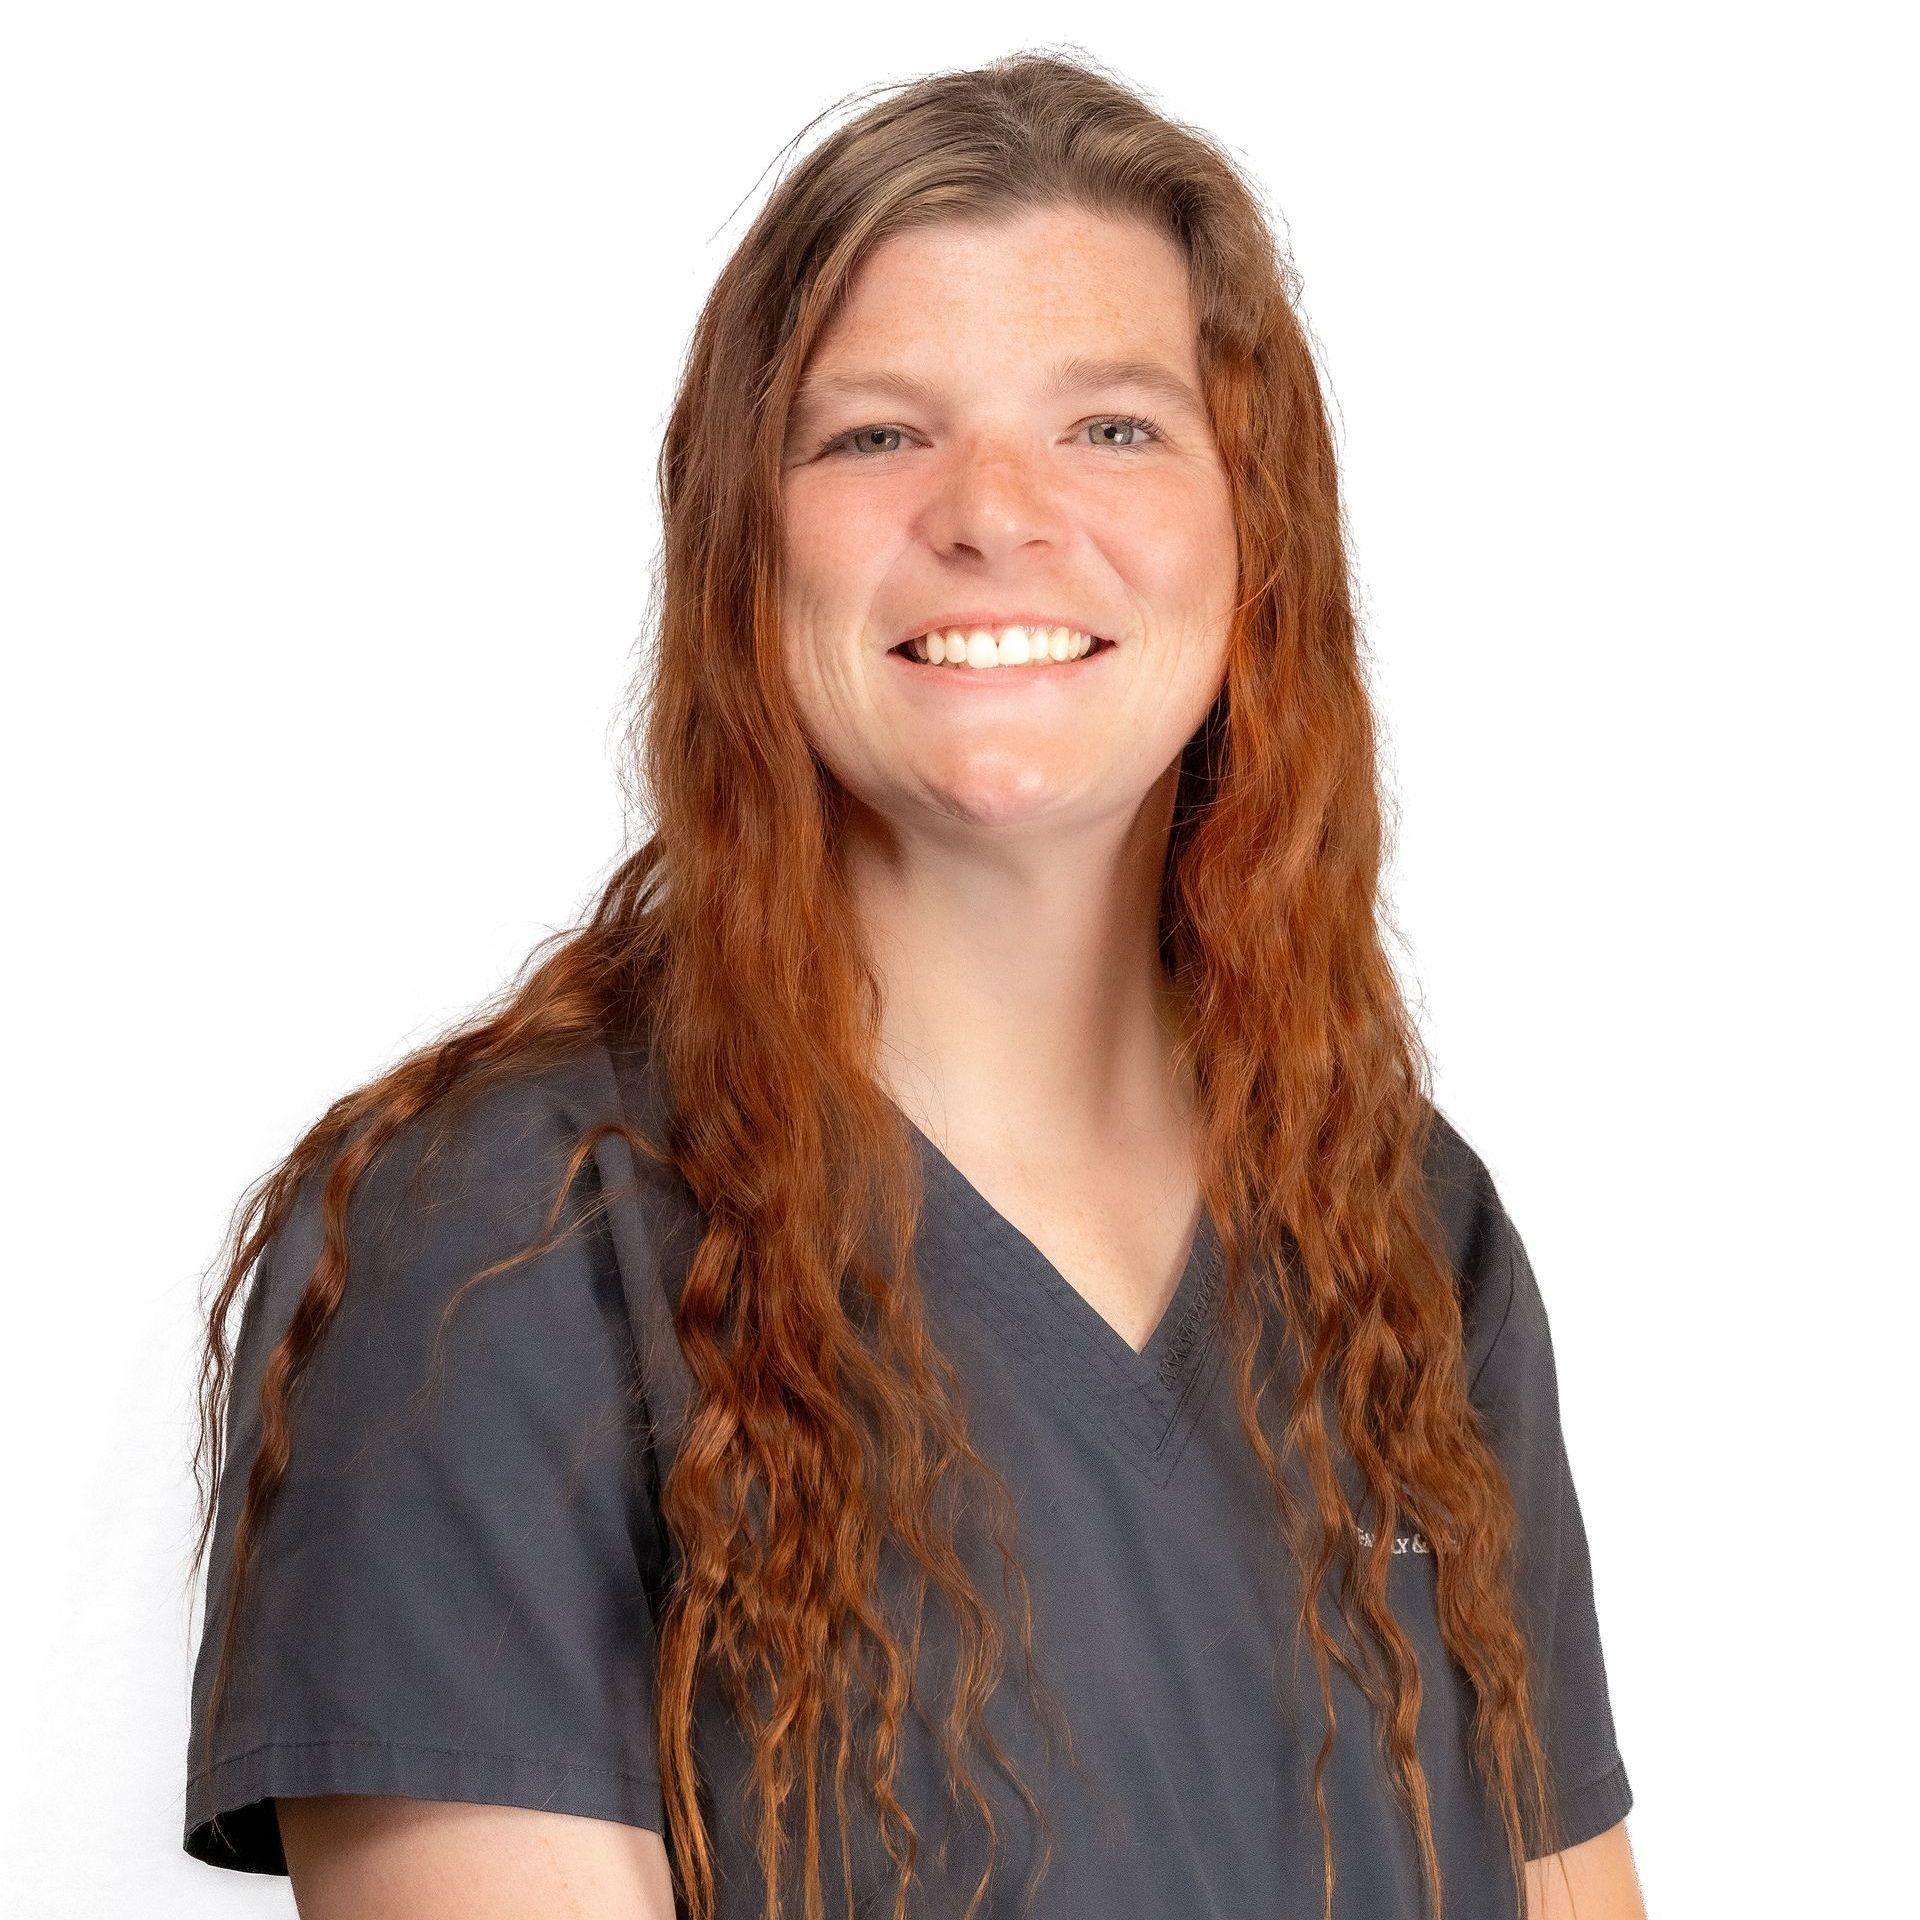 a woman with long red hair is wearing a gray scrub top and smiling .